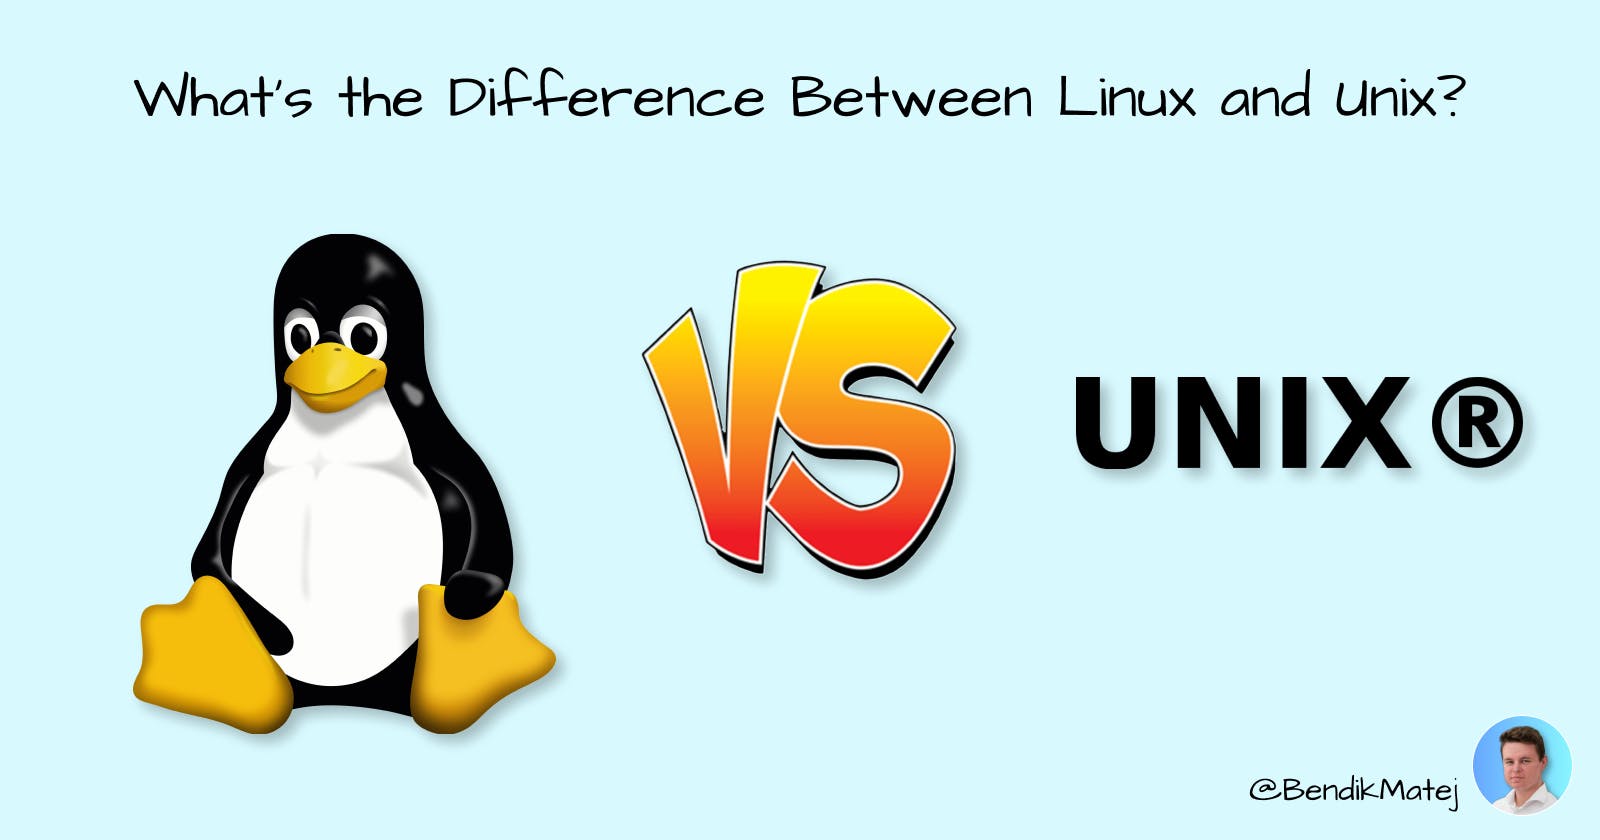 What's the Difference Between Linux and Unix?